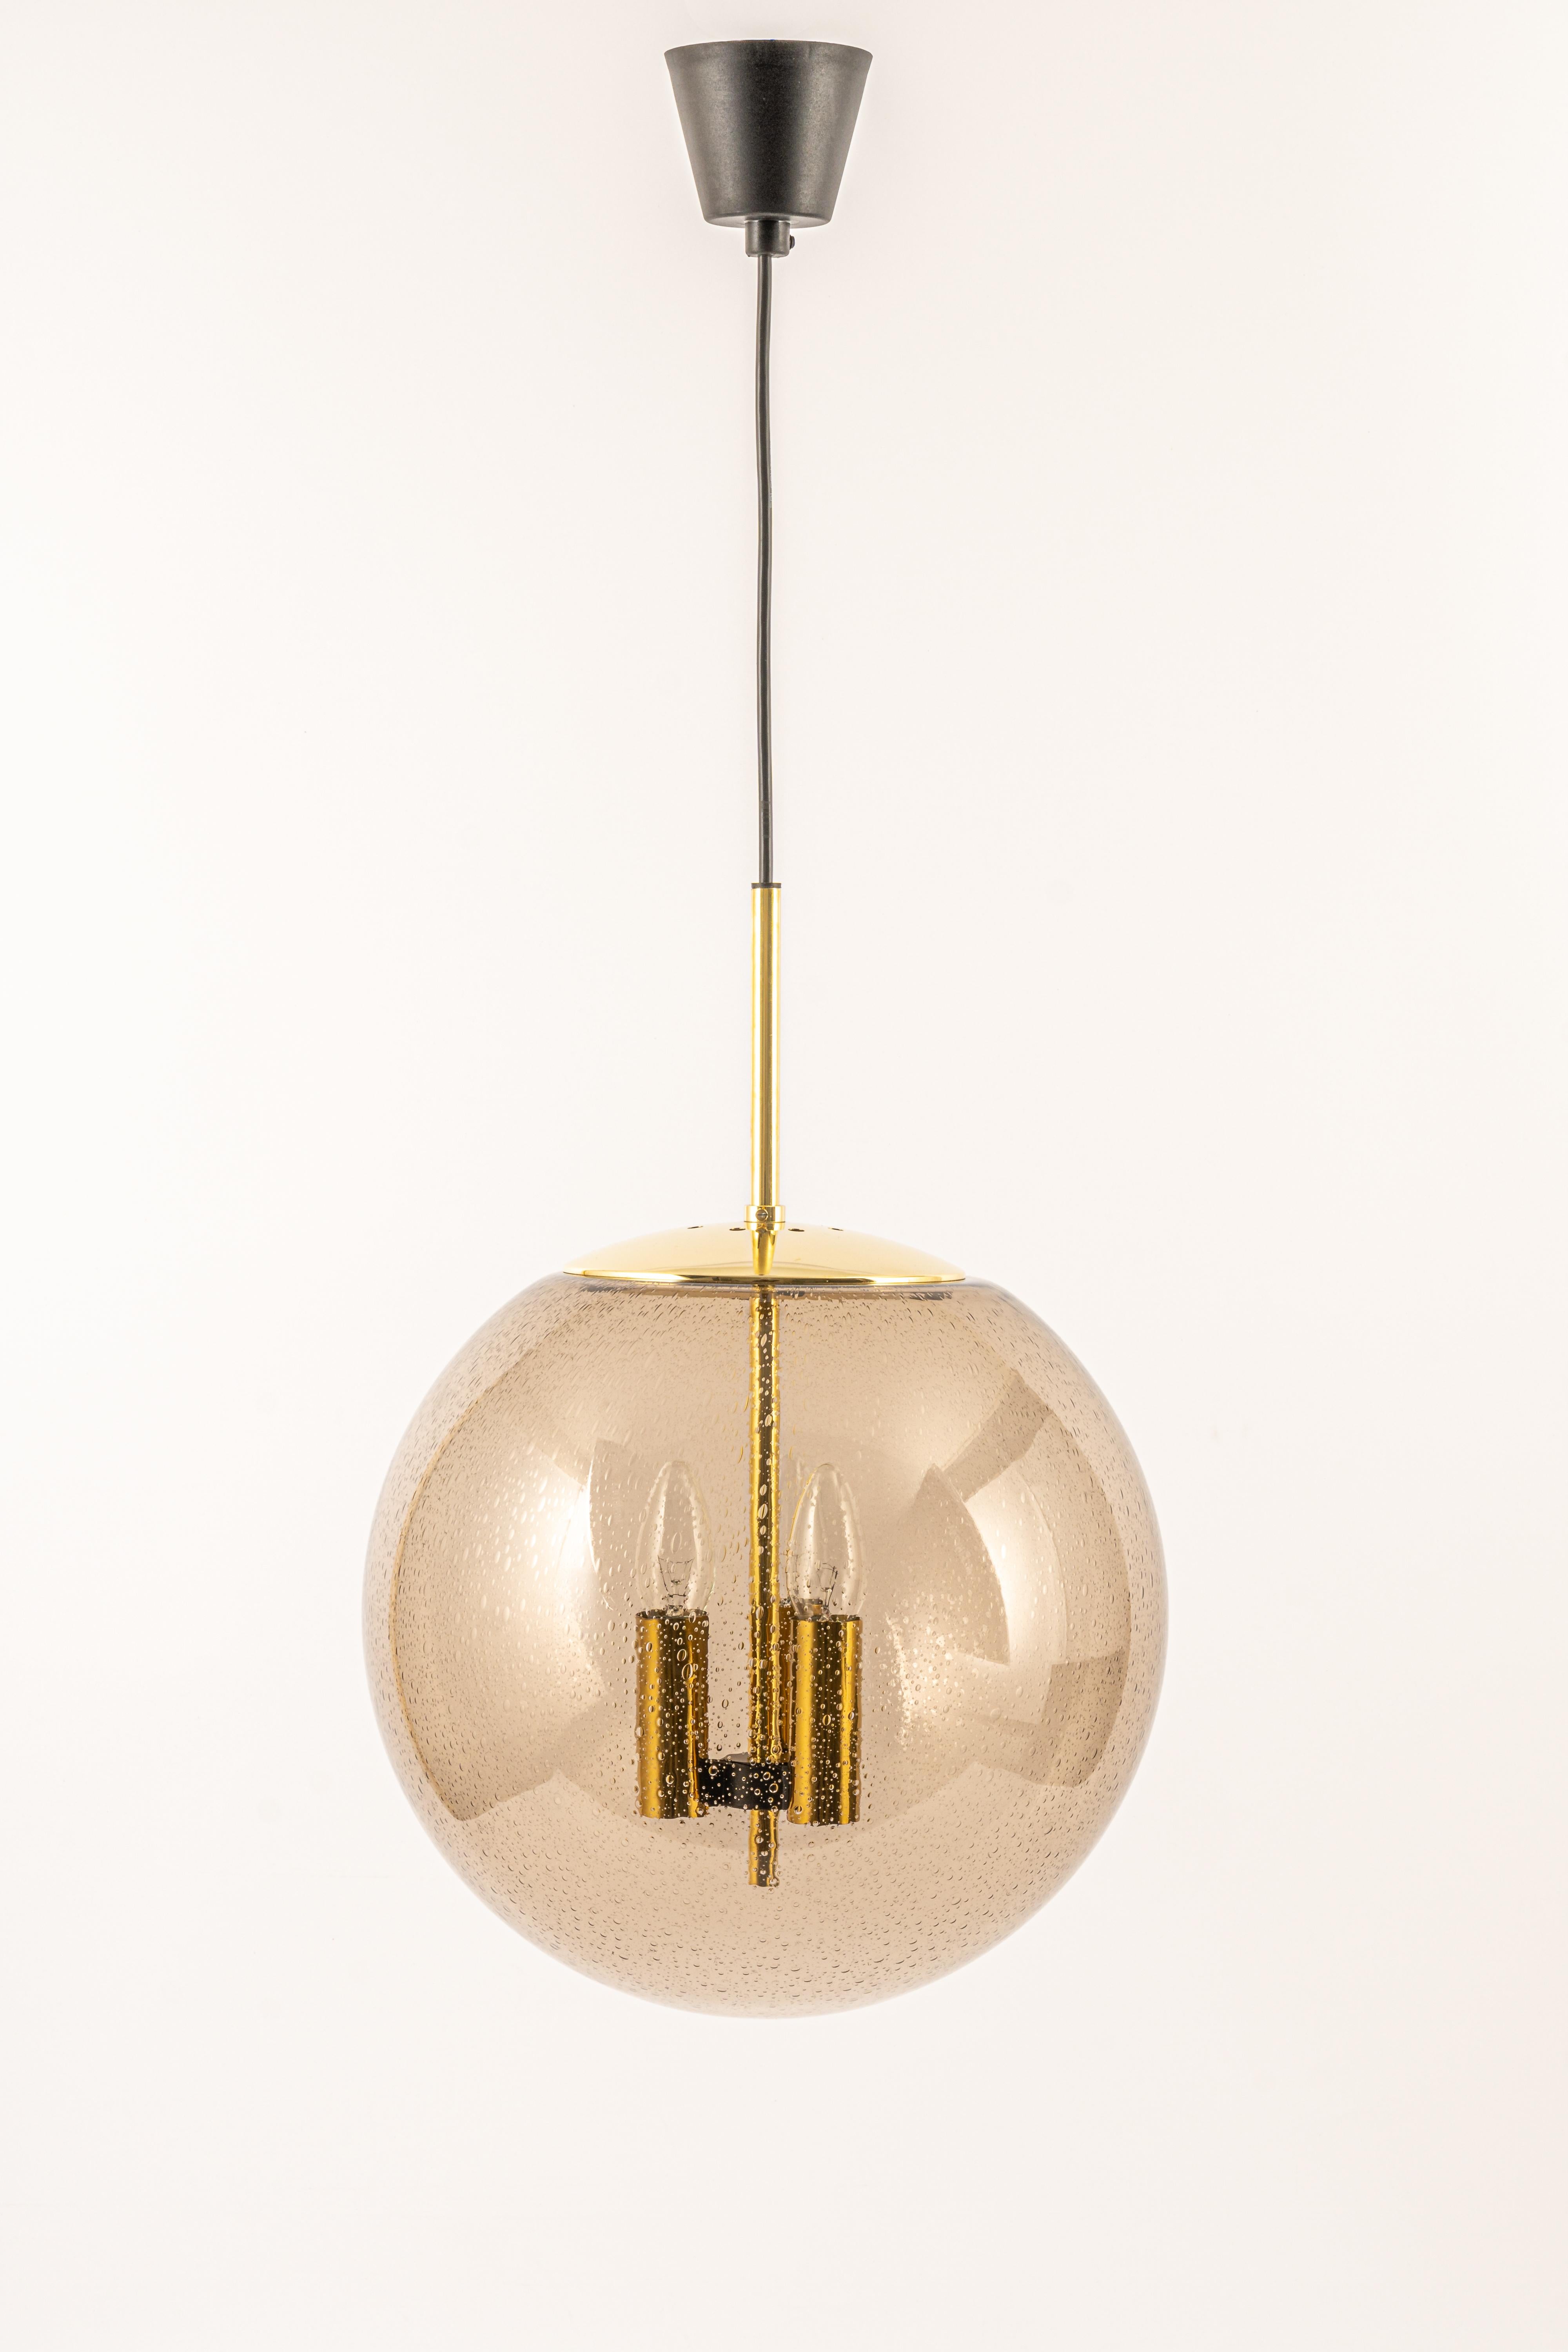 Large Limburg Brass with Smoked Glass Ball Pendant, Germany, 1970s For Sale 7